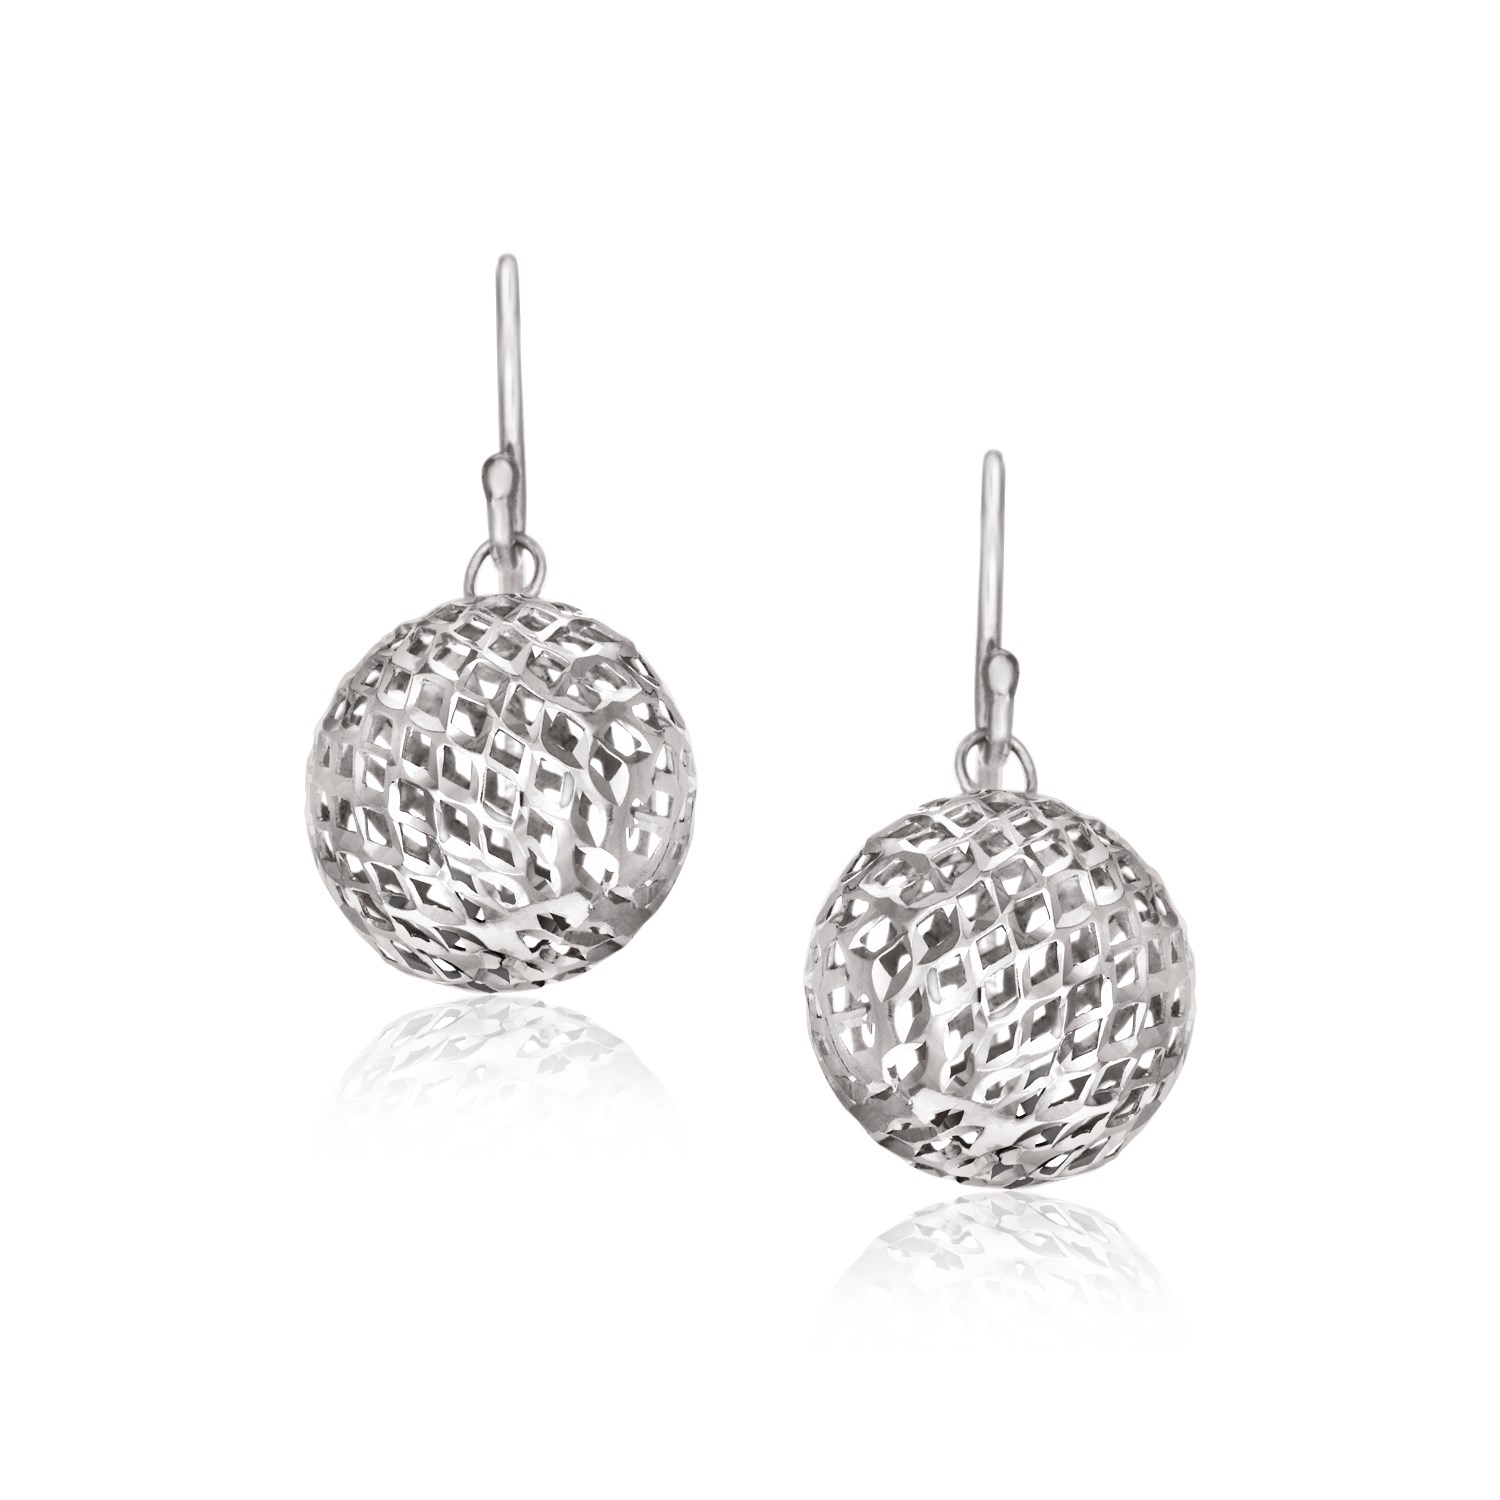 Mesh Texture Ball Drop Earrings in Sterling Silver - Richard Cannon Jewelry